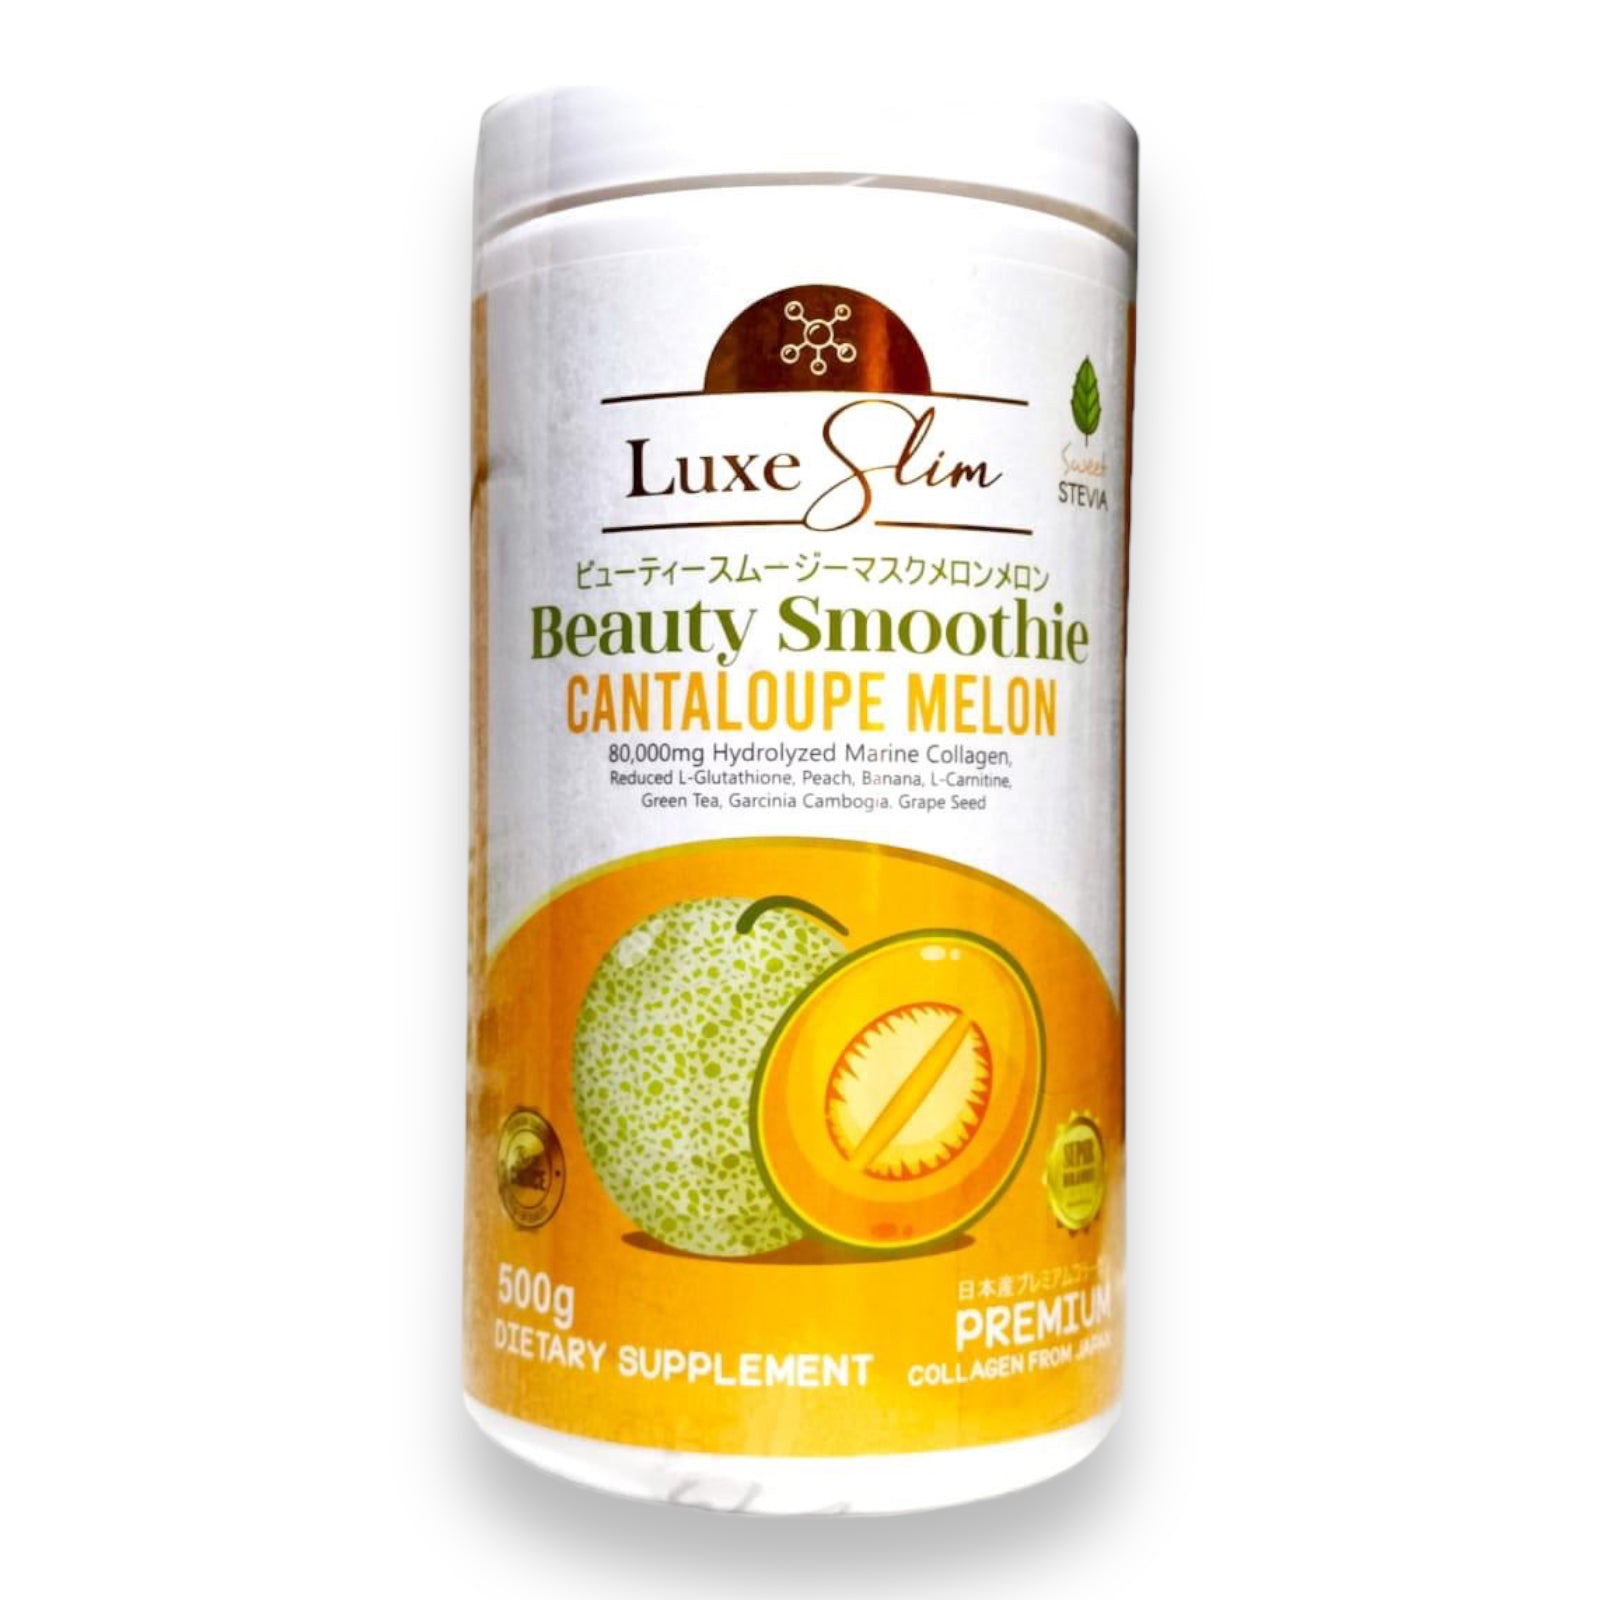 Luxe Slim - Beauty Smoothie Cantaloupe Melon - Canister HALF KILO 500g